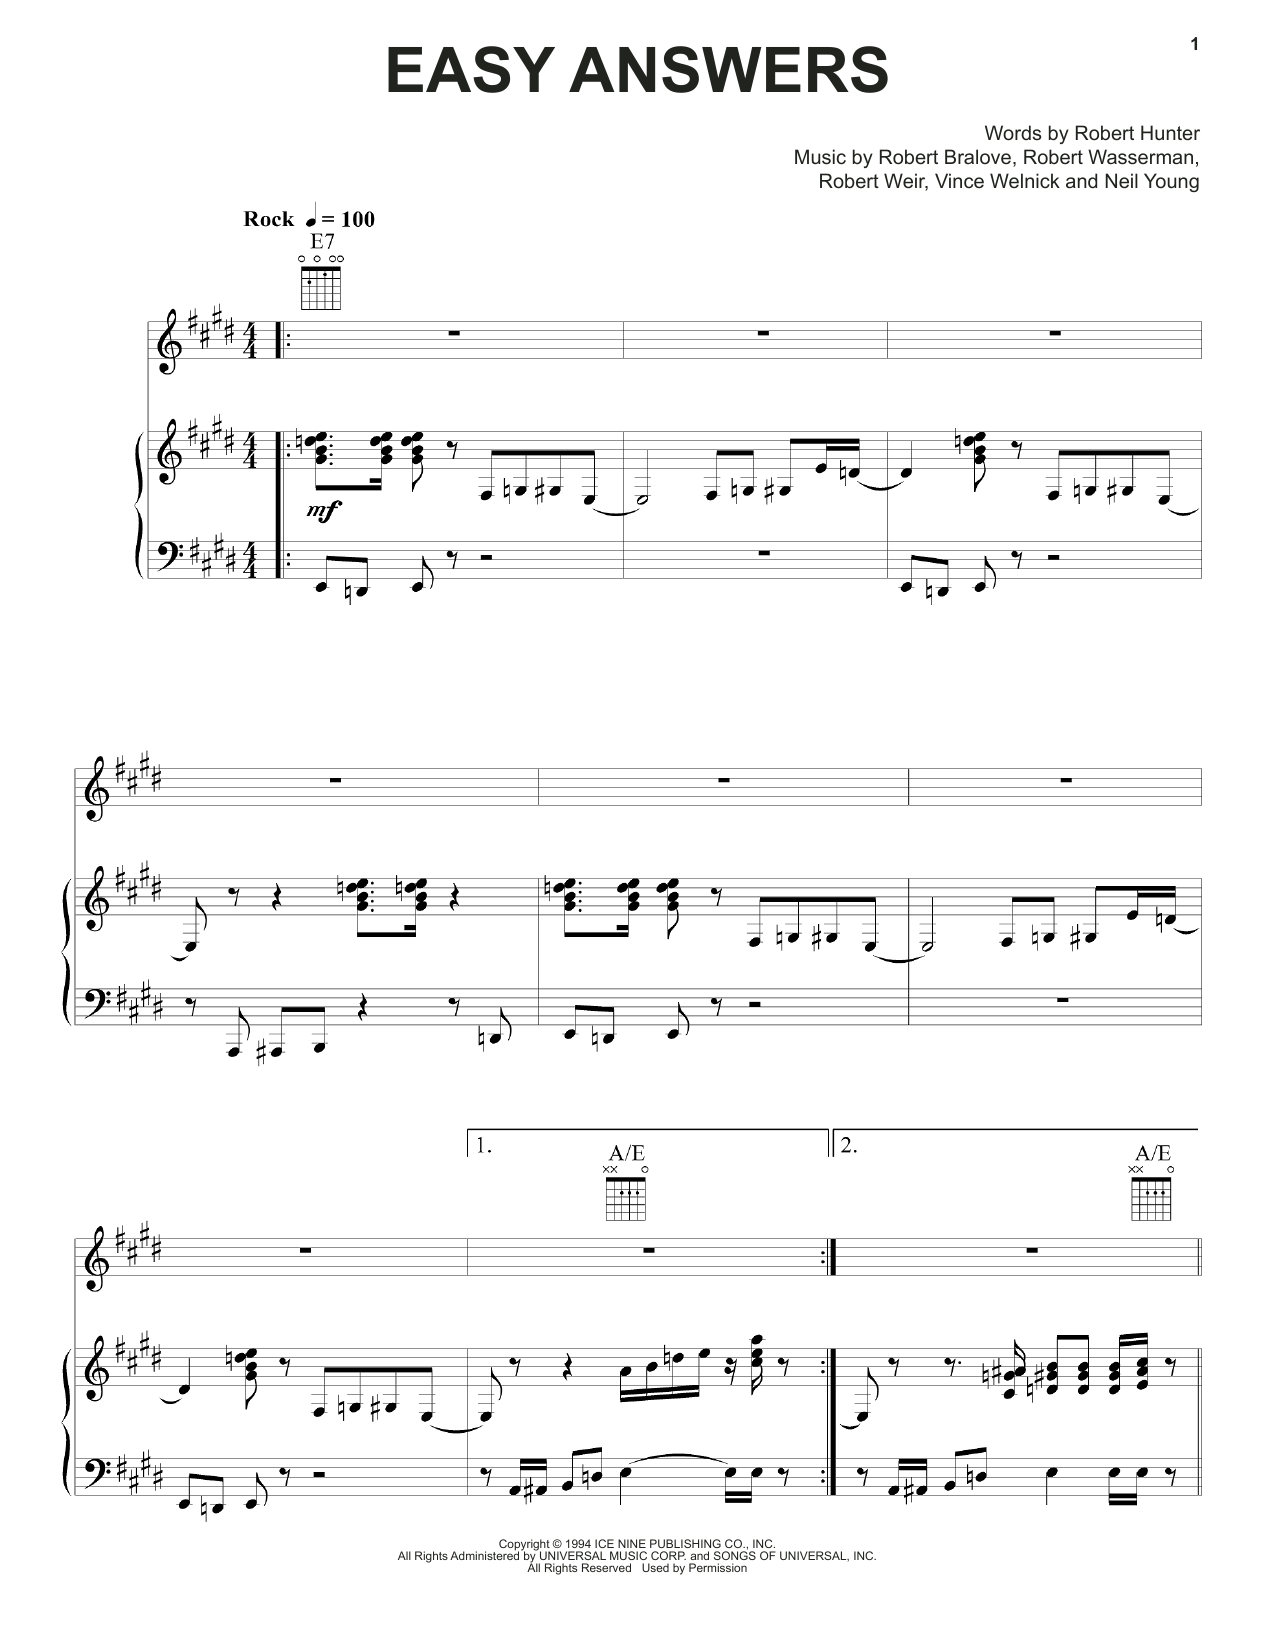 Download Grateful Dead Easy Answers Sheet Music